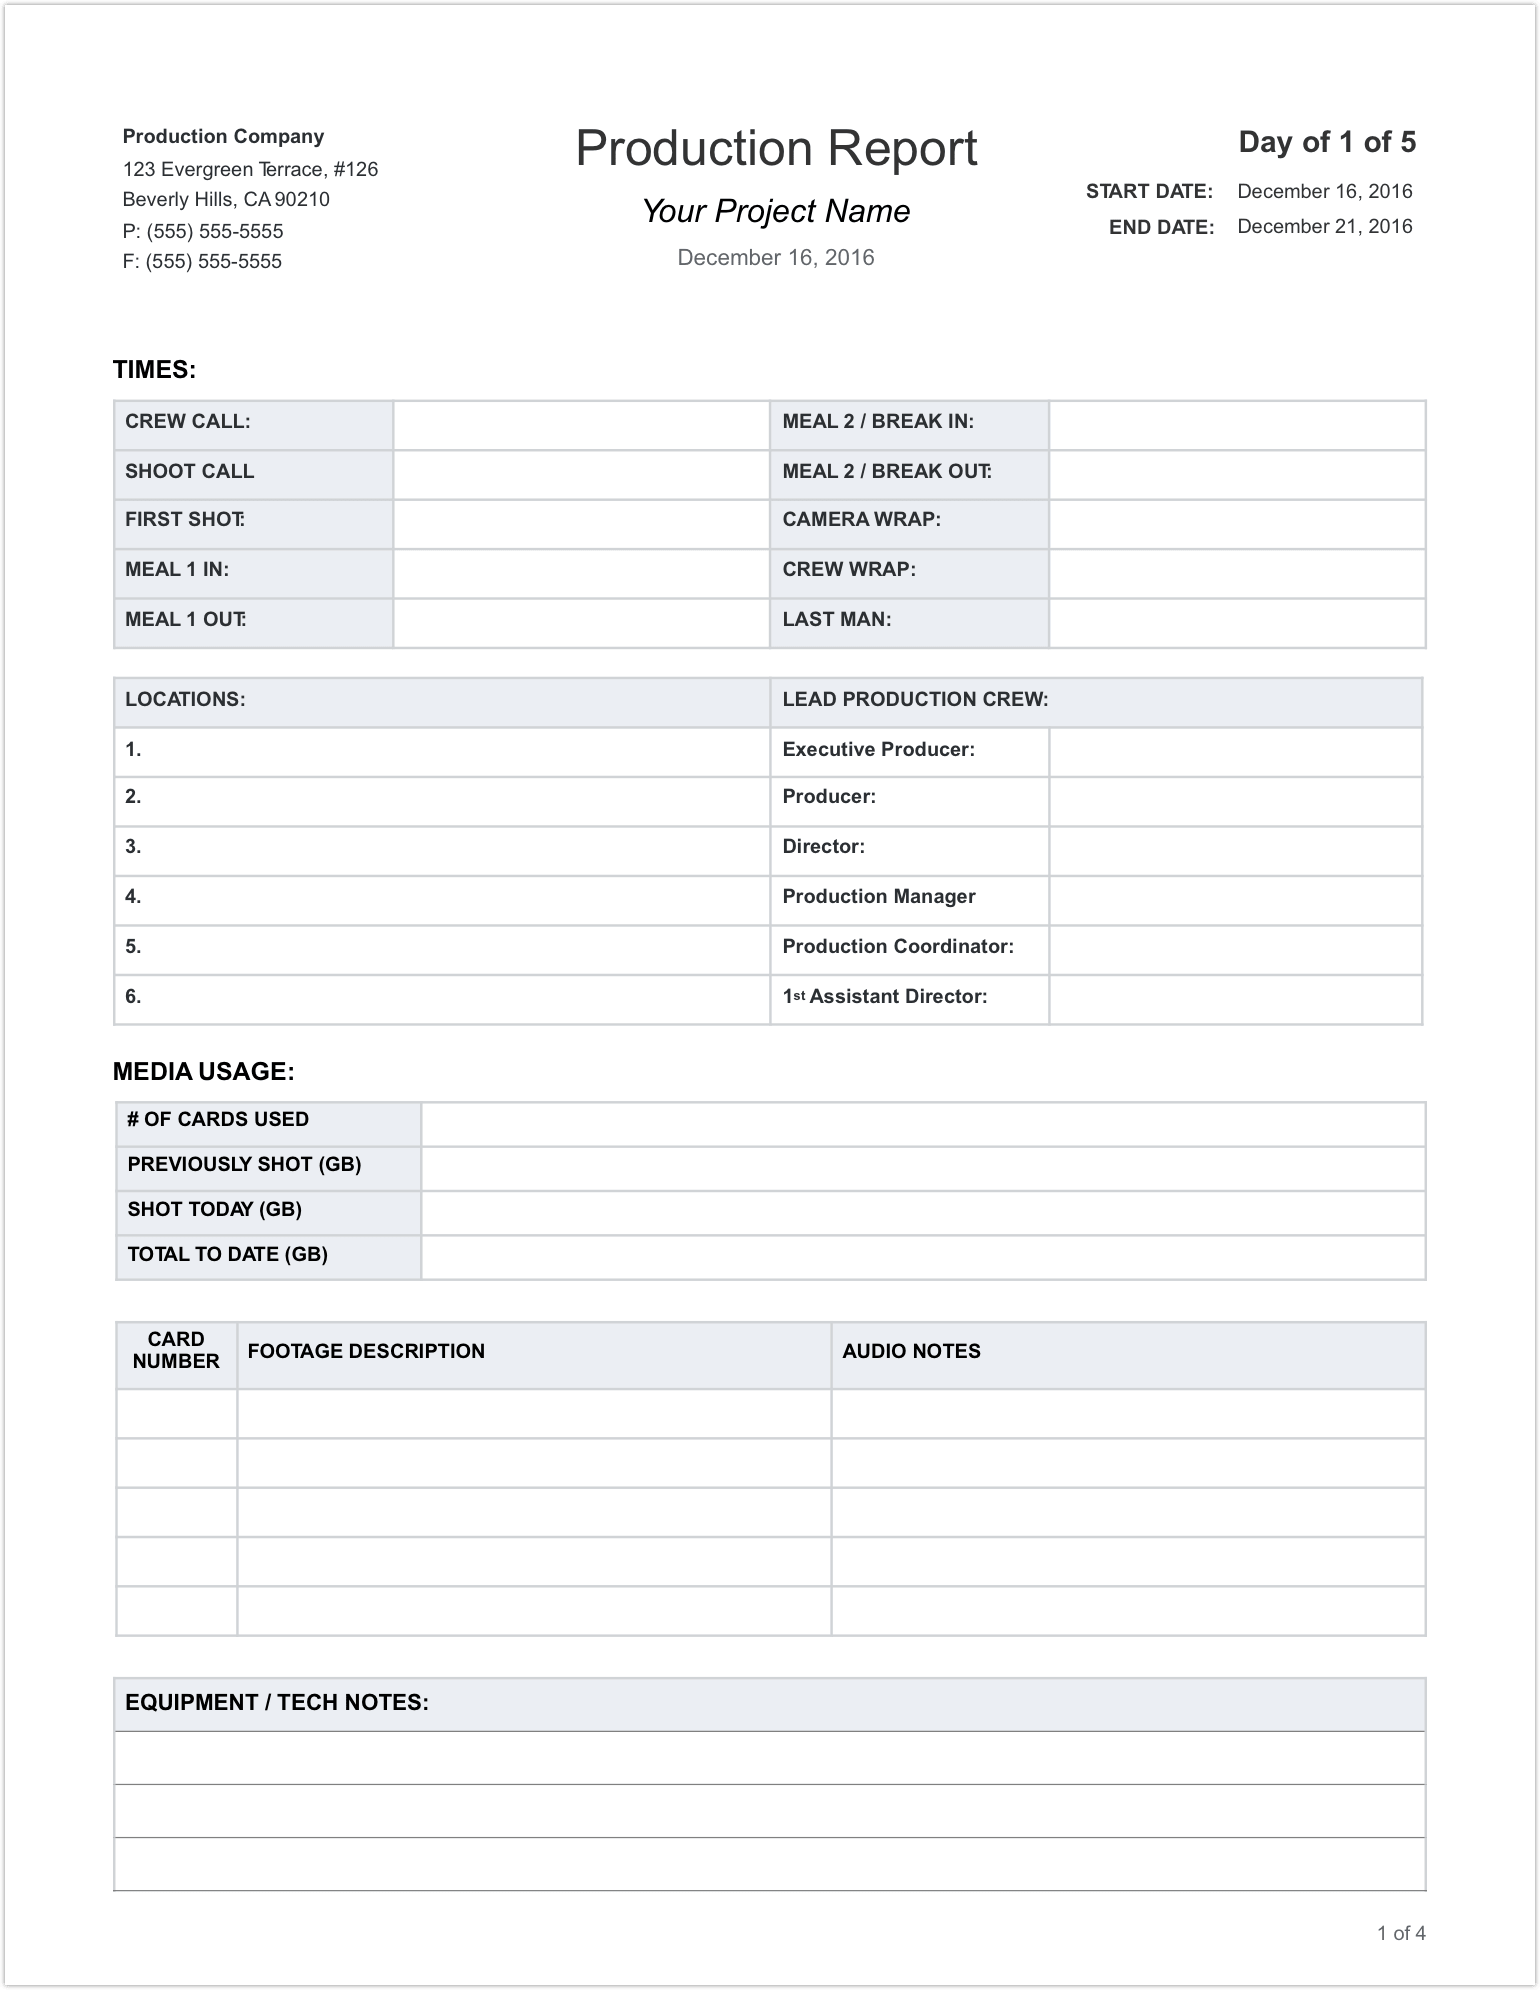 Daily Production Report Template - Page 1 - StudioBinder